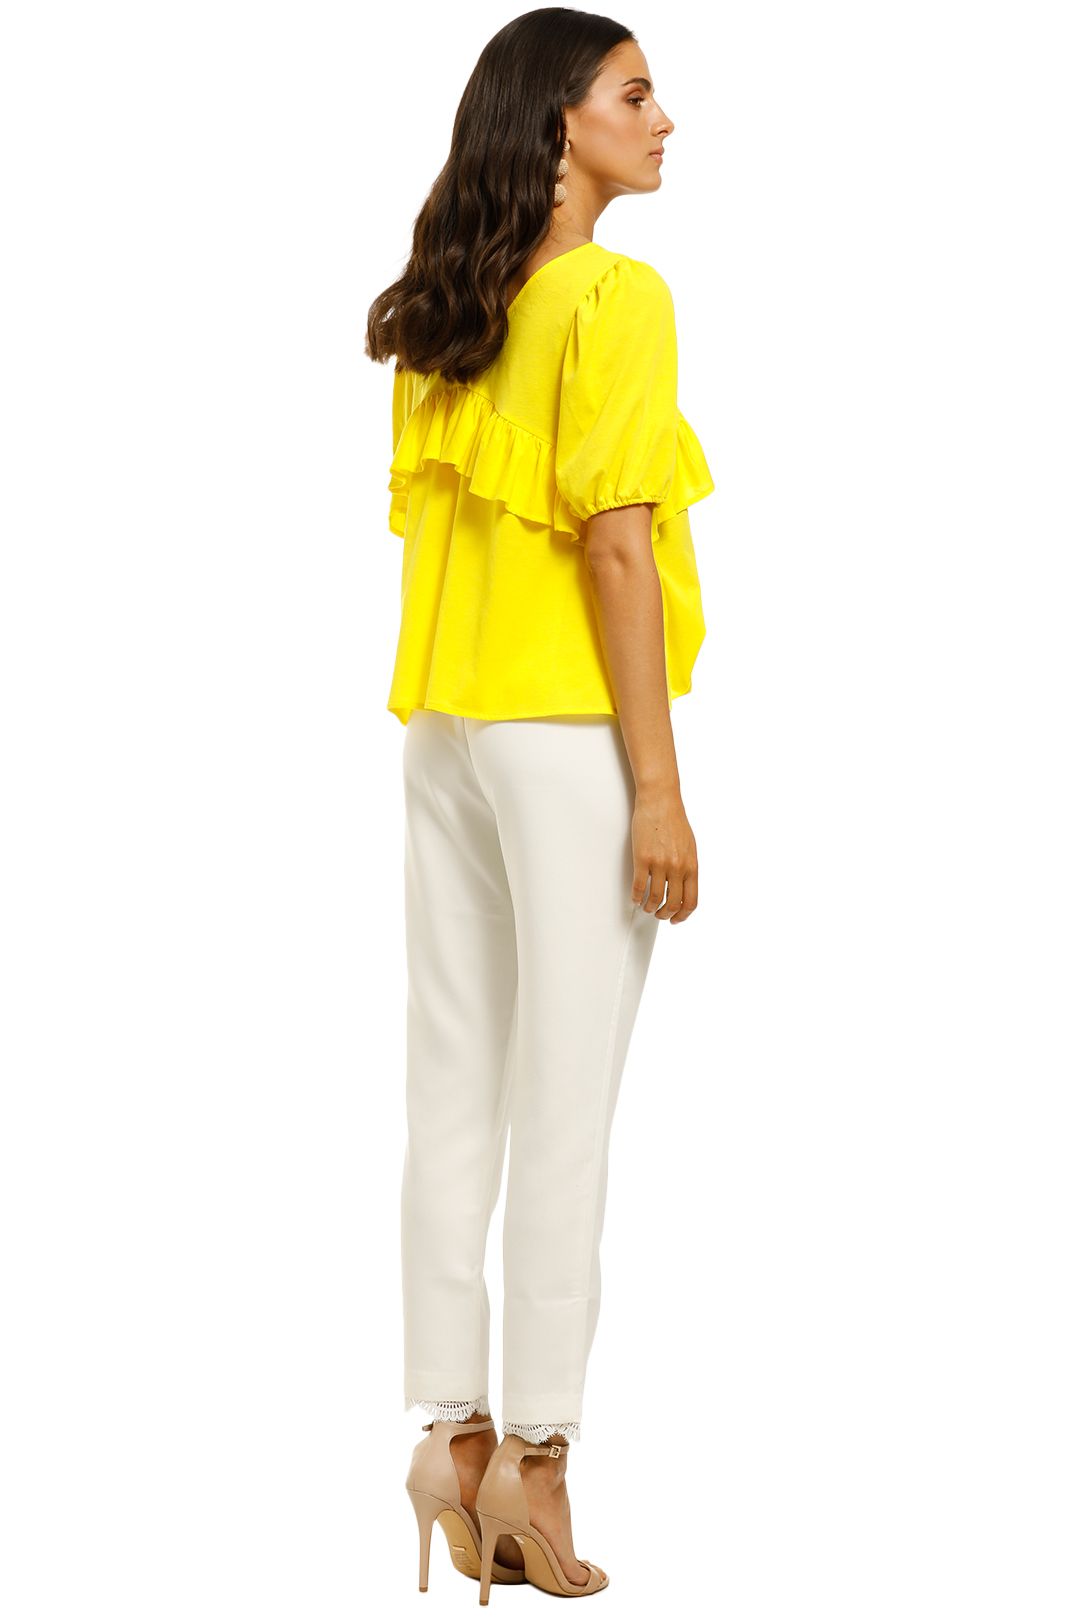 Coop-by-Trelise-Cooper-Frill-Life-Top-Yellow-Back